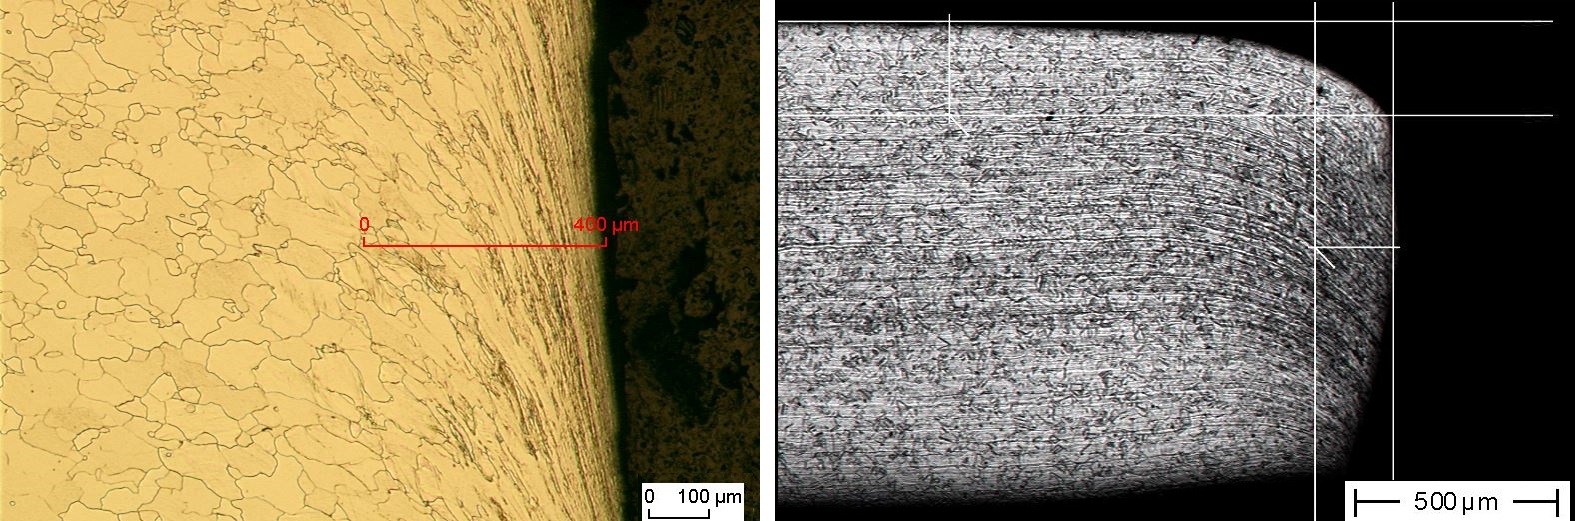 deformed grains and structure of edge by punching